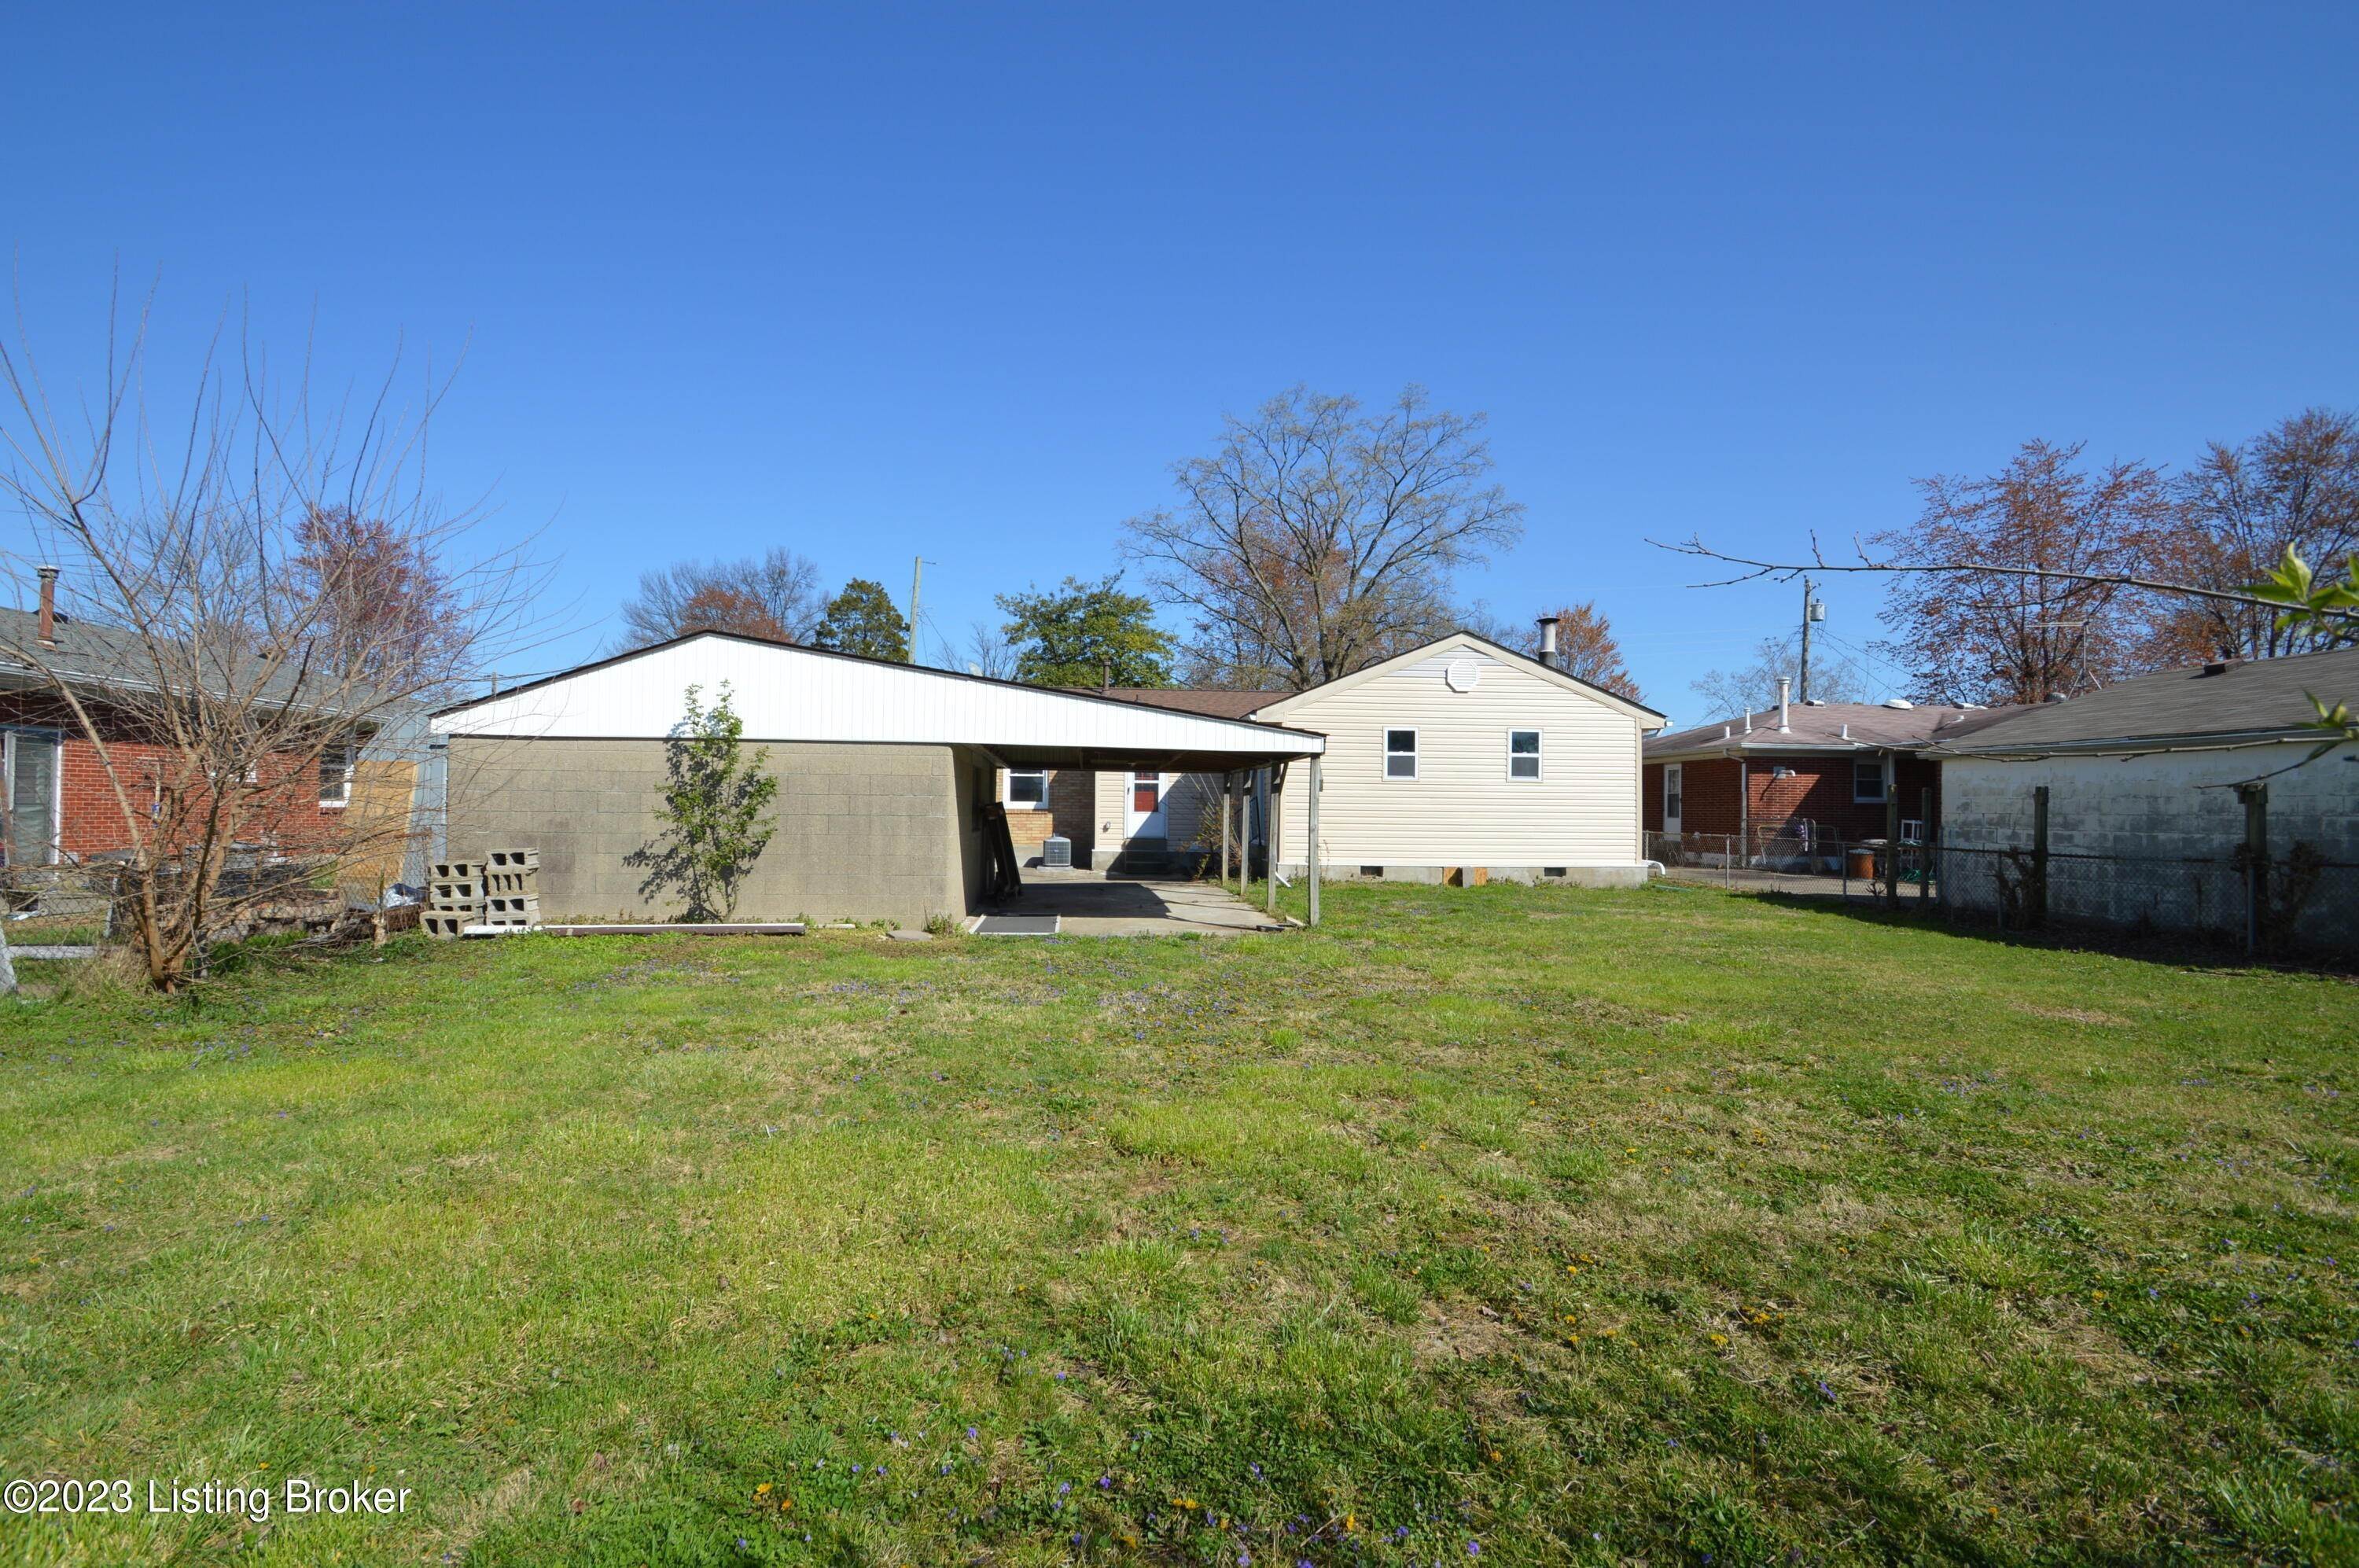 32. Single Family at Louisville, KY 40213